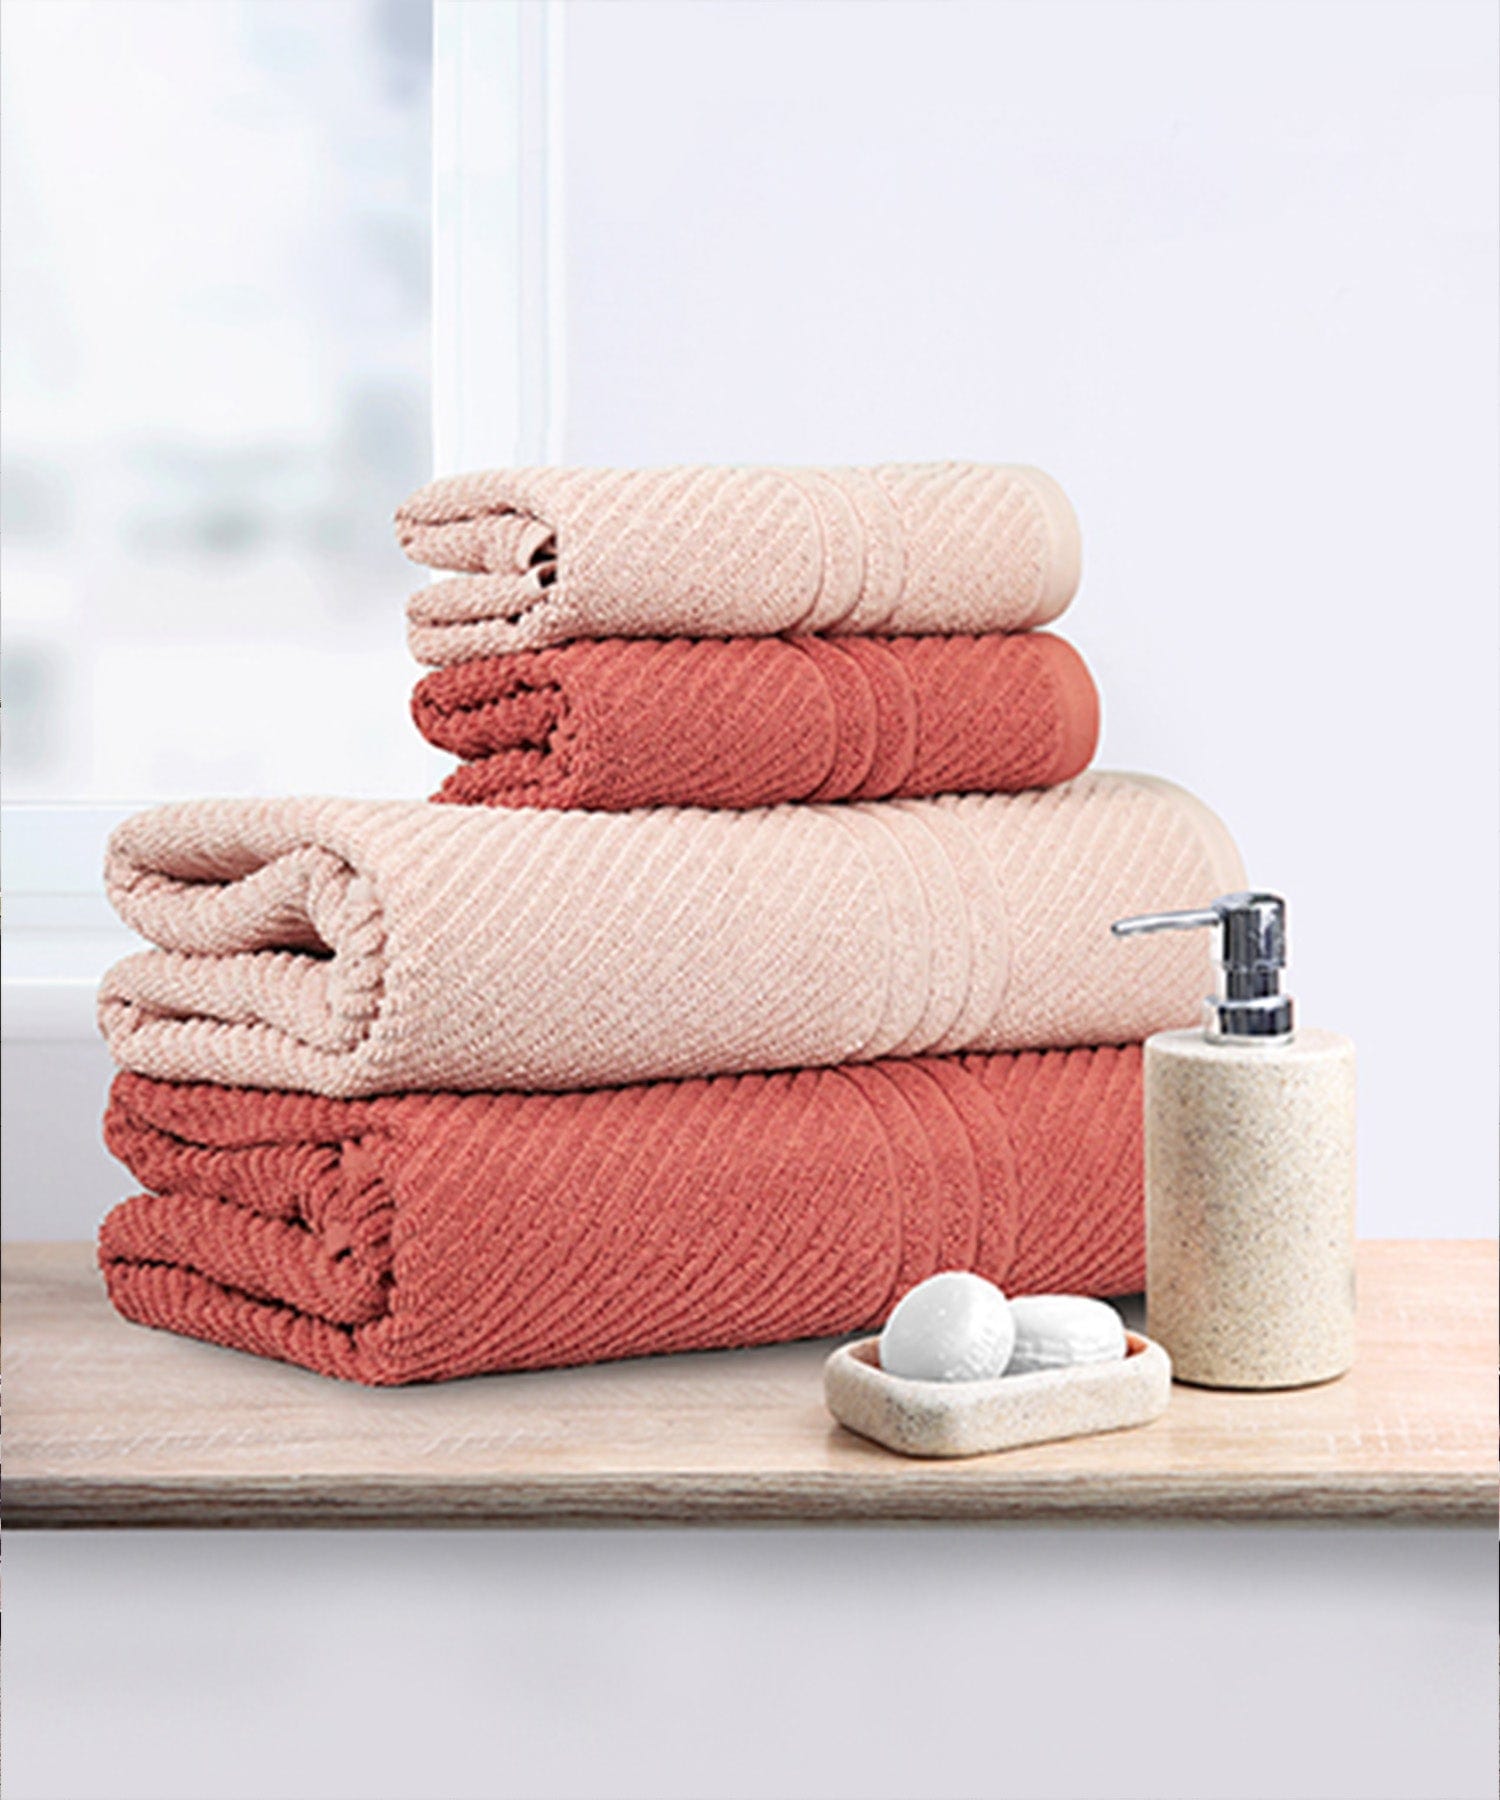 500 GSM , AROMA TOWEL,100% Cotton,Durable,Super Soft, STAWBERRY